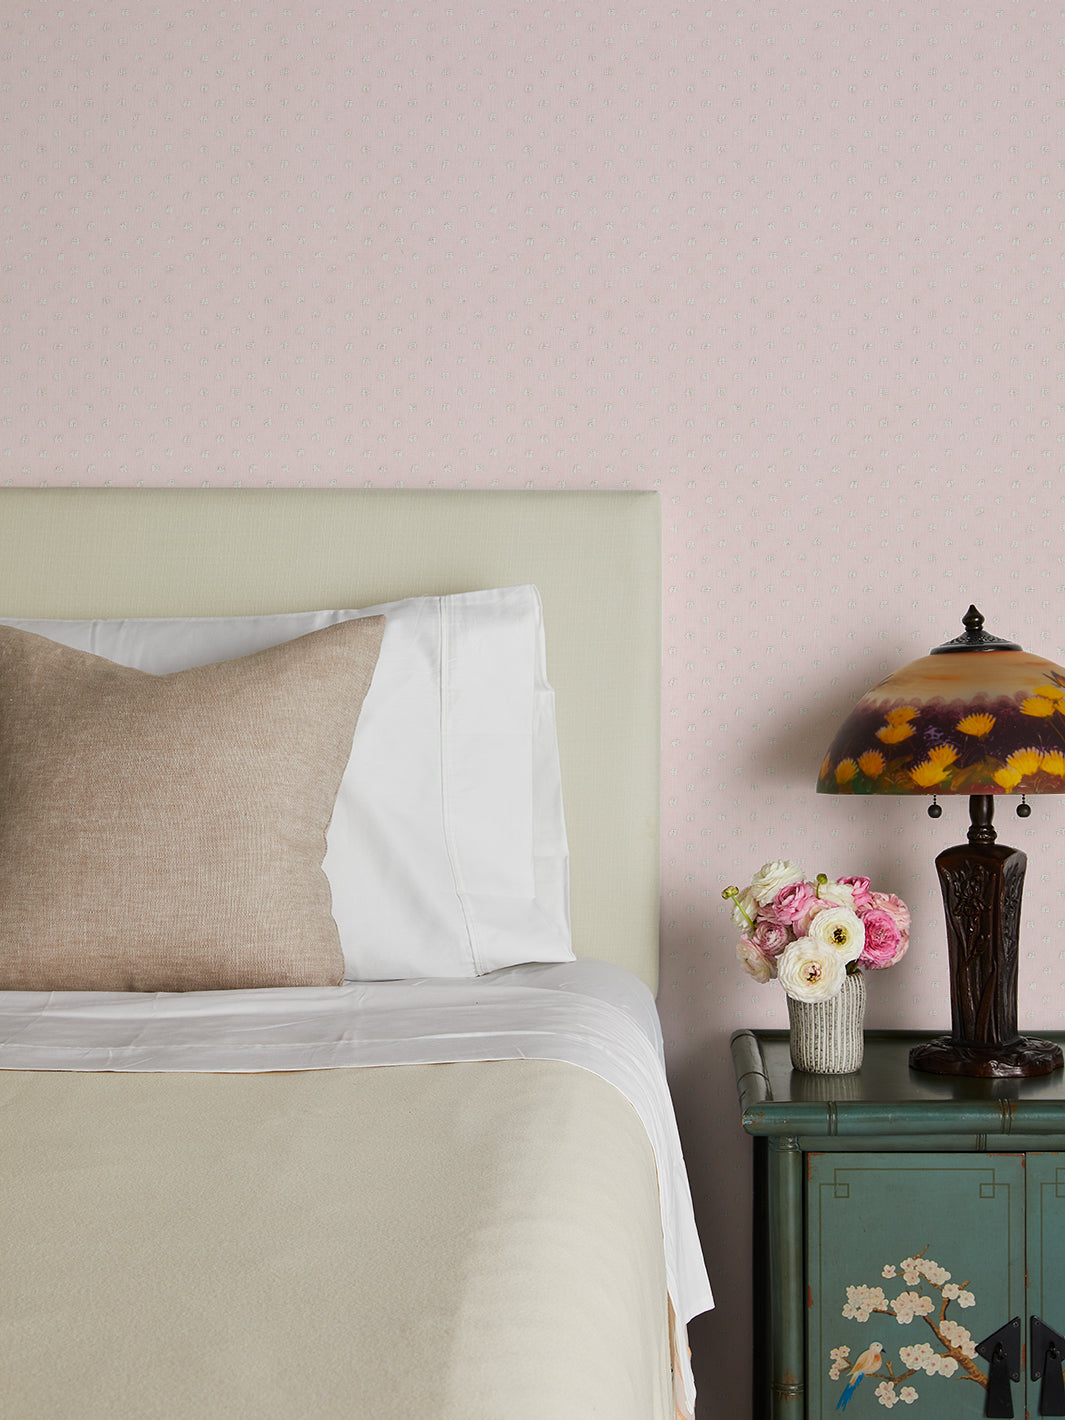 'Dotted Swiss' Wallpaper by Sarah Jessica Parker - Pink